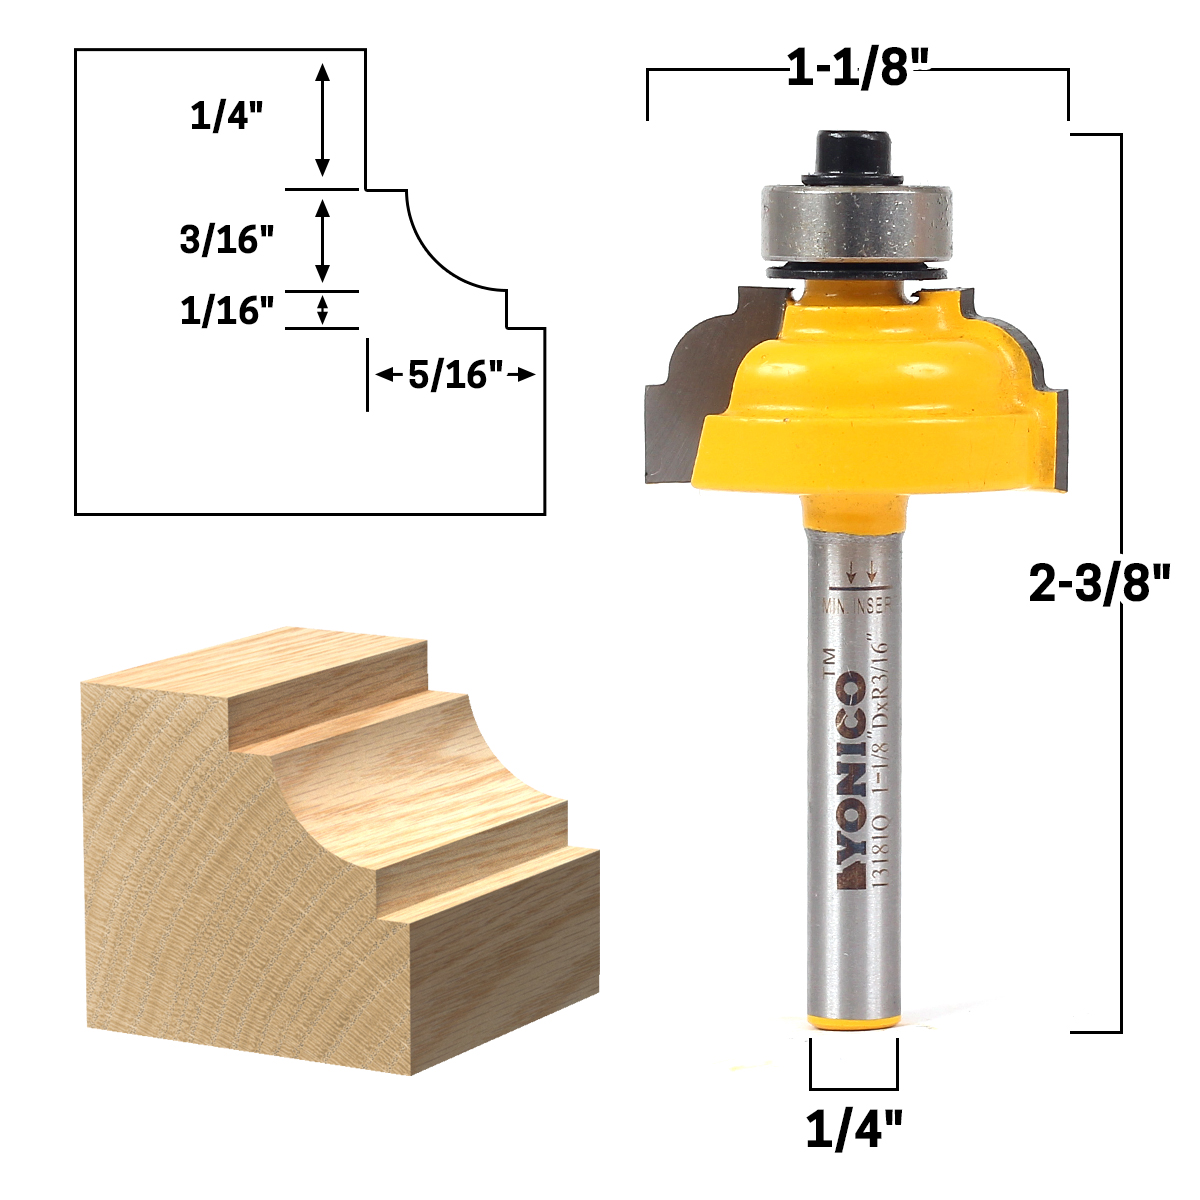 1 NEW  Yonico 5/16" R 1-1/4" OD Classic Cove Carbide Tip Router Bit Shank y2 